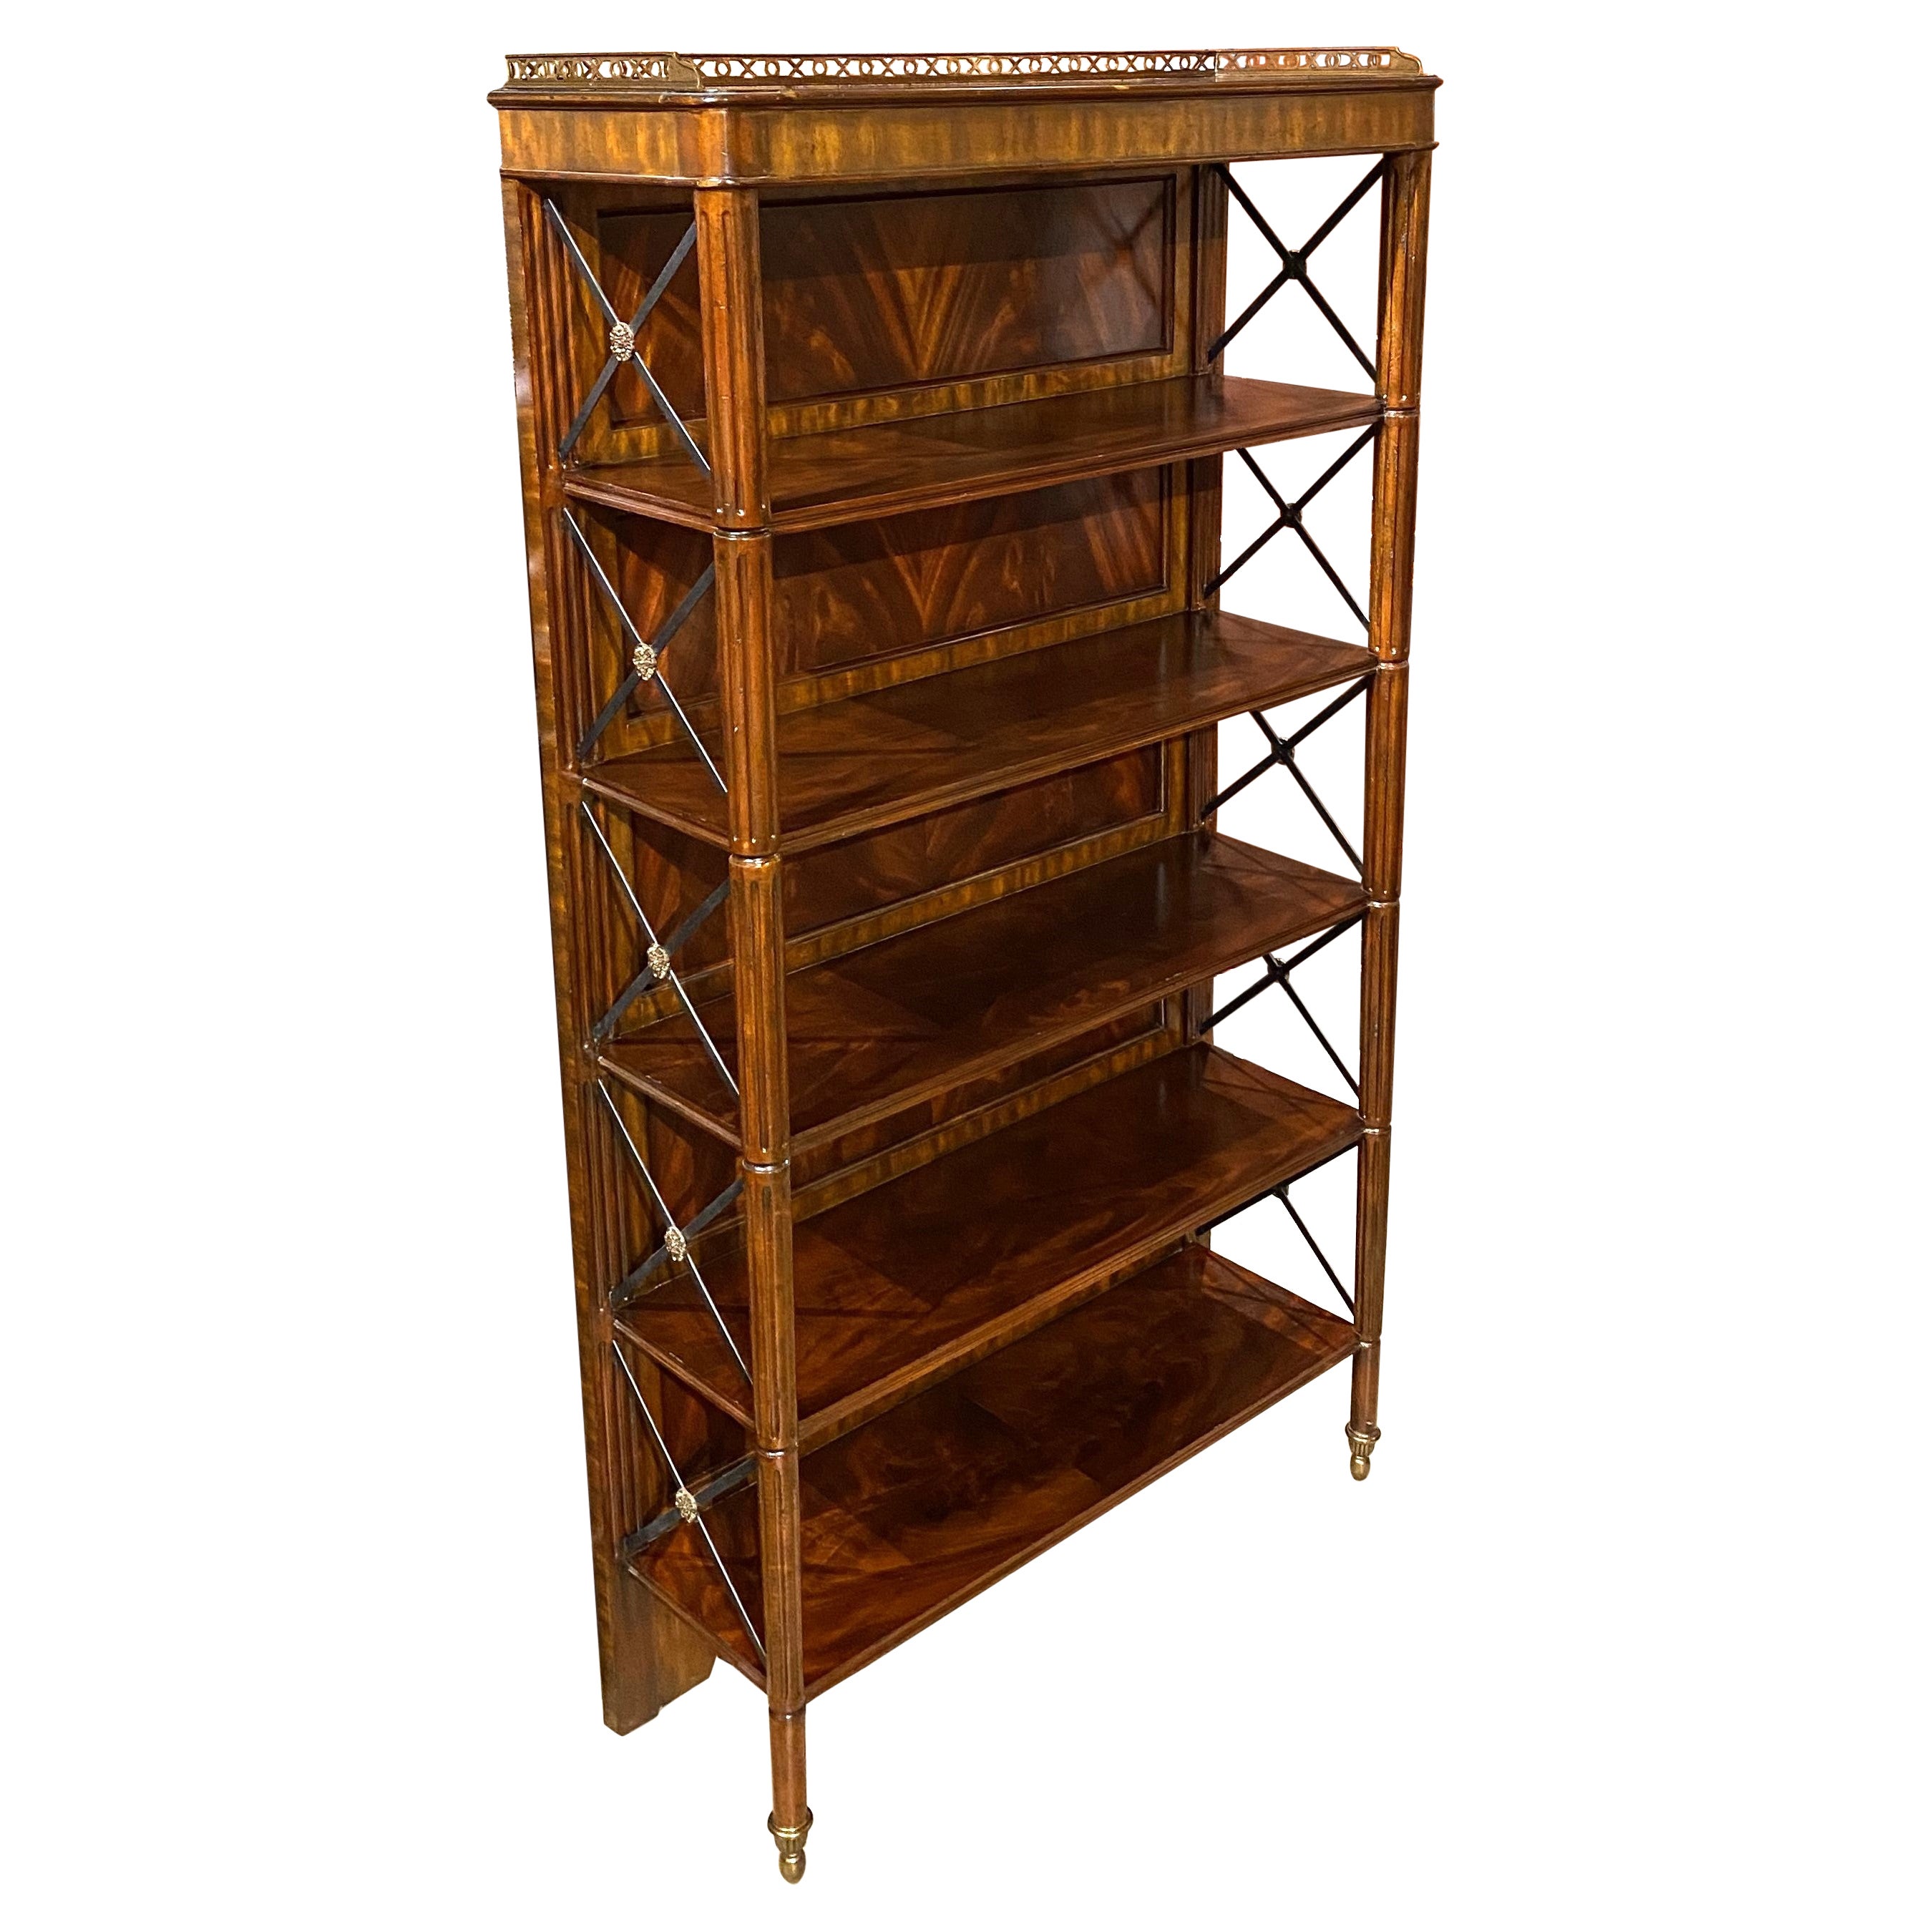 Maitland Smith Flame Mahogany Étagère or Bookshelf with Brass Gallery For Sale